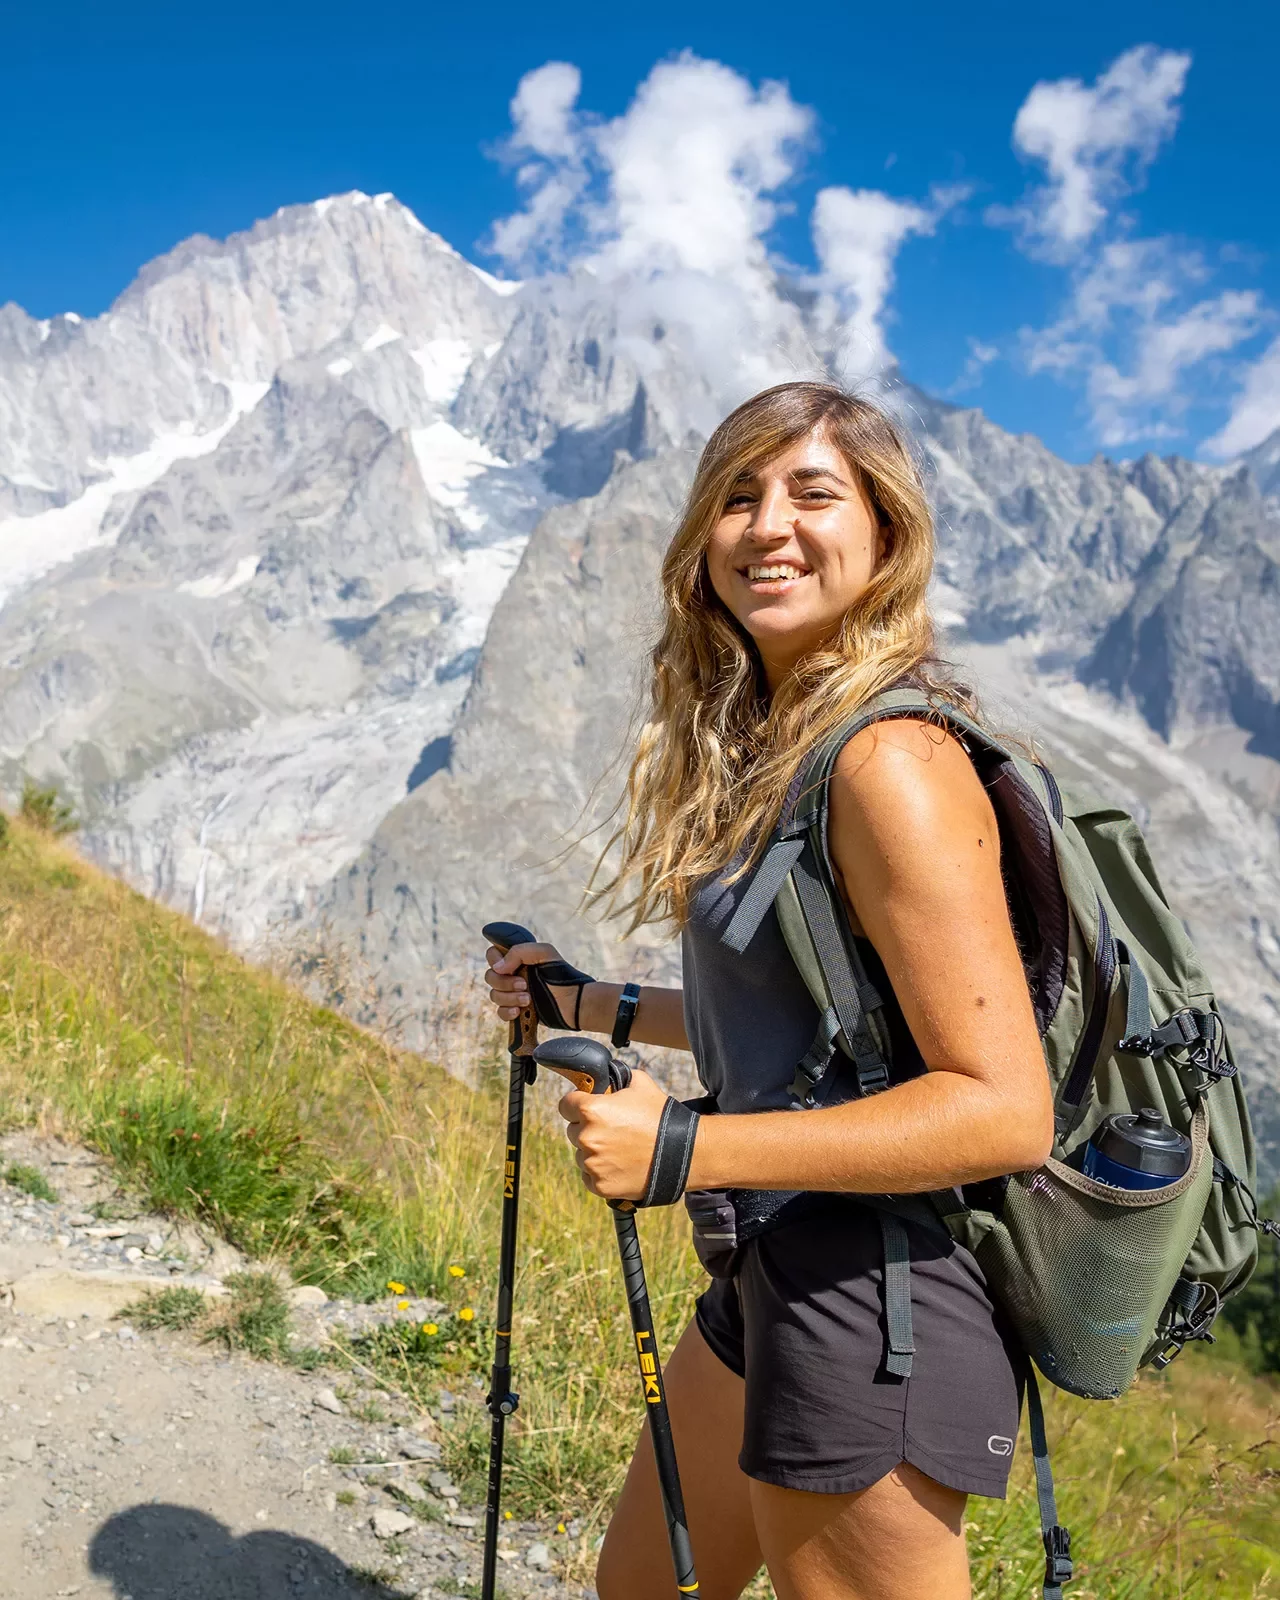 Guest with hiking poles smiling for camera, craggy mountains in distance.